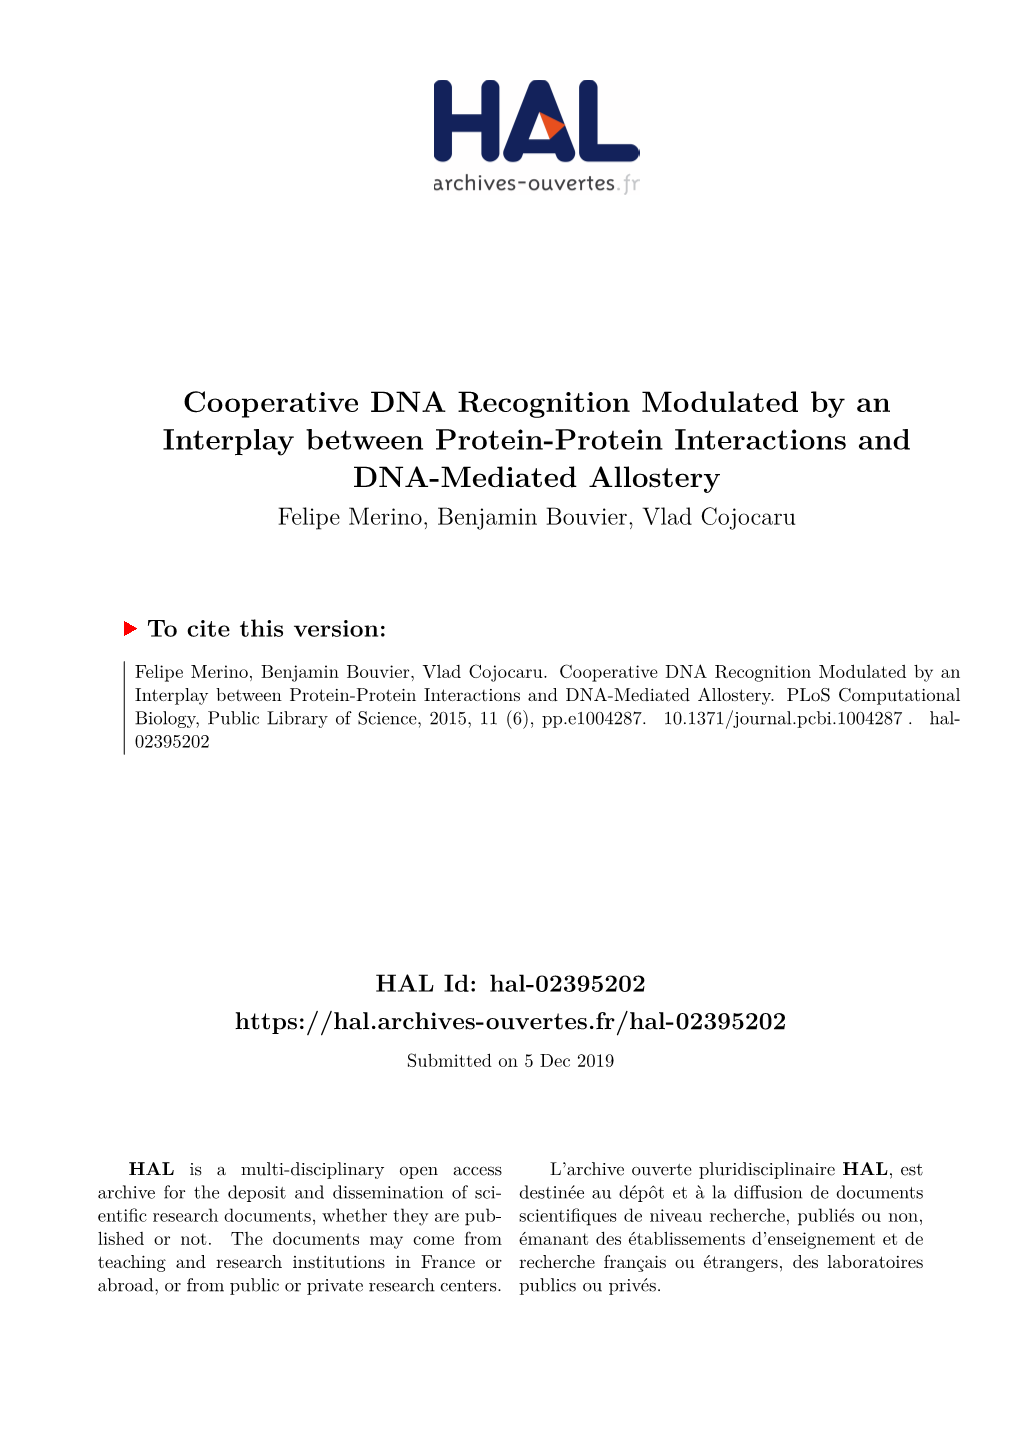 Cooperative DNA Recognition Modulated by an Interplay Between Protein-Protein Interactions and DNA-Mediated Allostery Felipe Merino, Benjamin Bouvier, Vlad Cojocaru